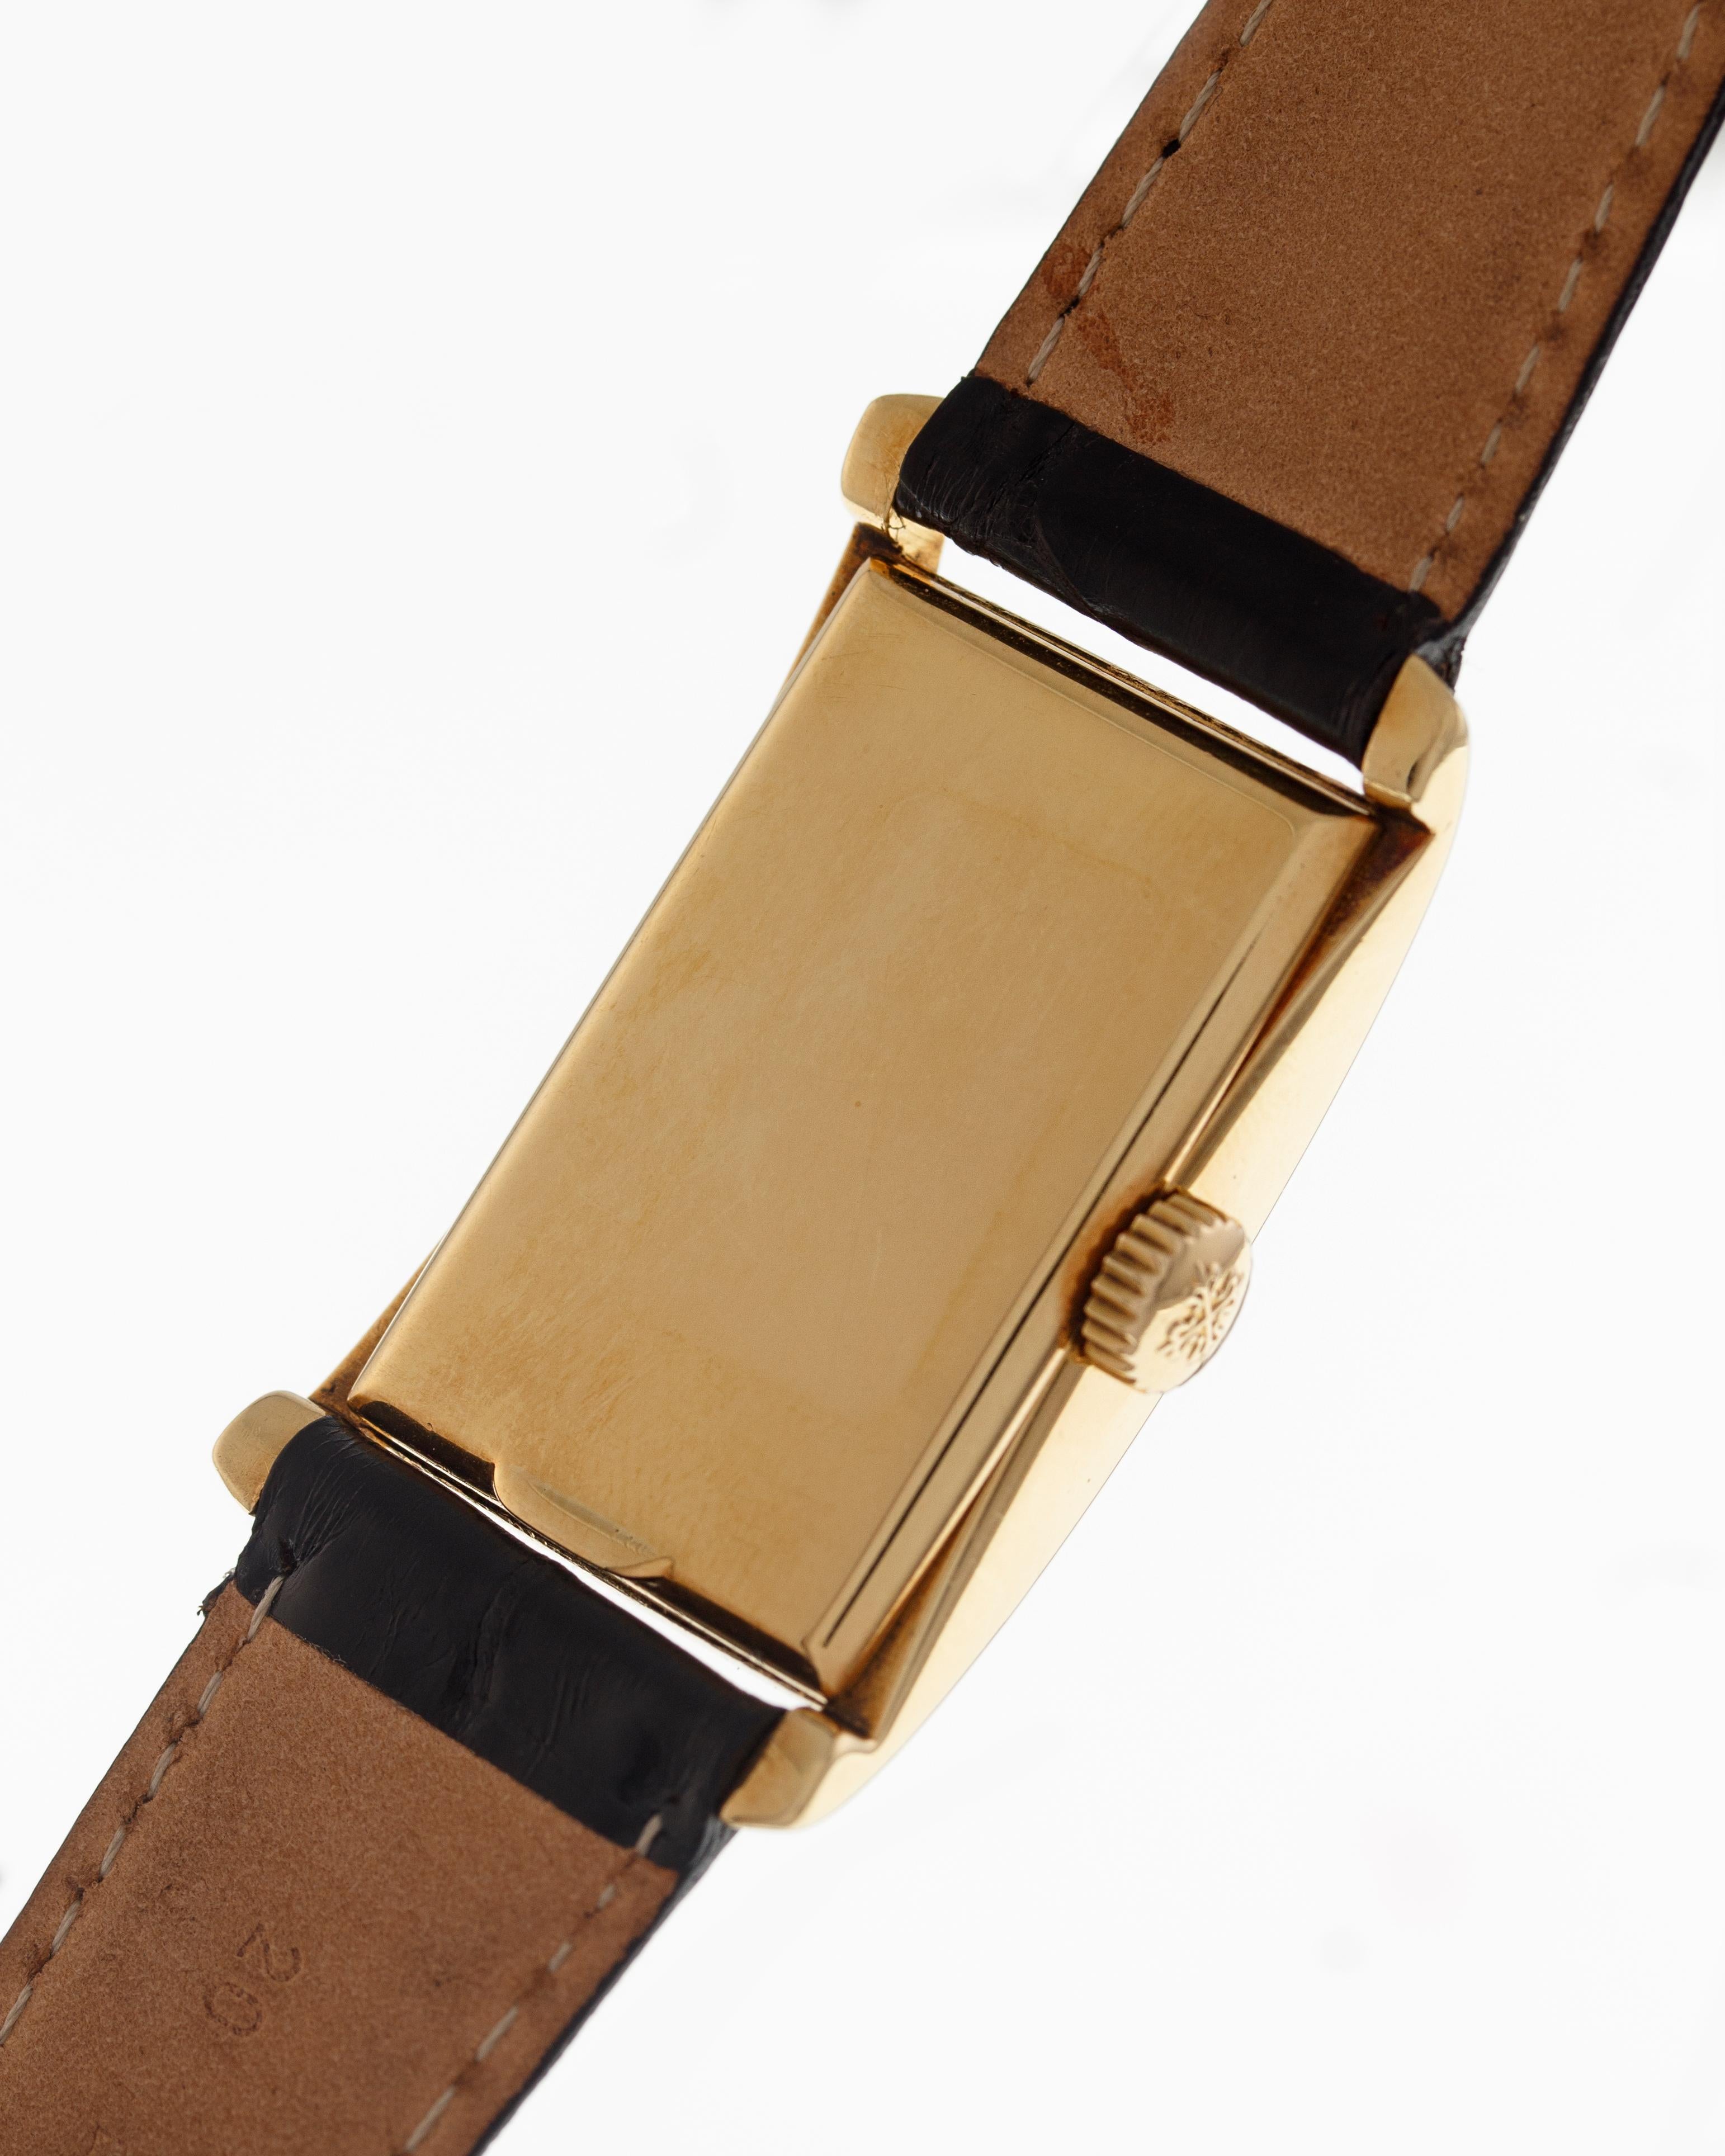 Patek Philippe Wrist Watch Hour Glass Ref. 1593 in 18 Carat Yellow Gold In Good Condition For Sale In Milan, IT